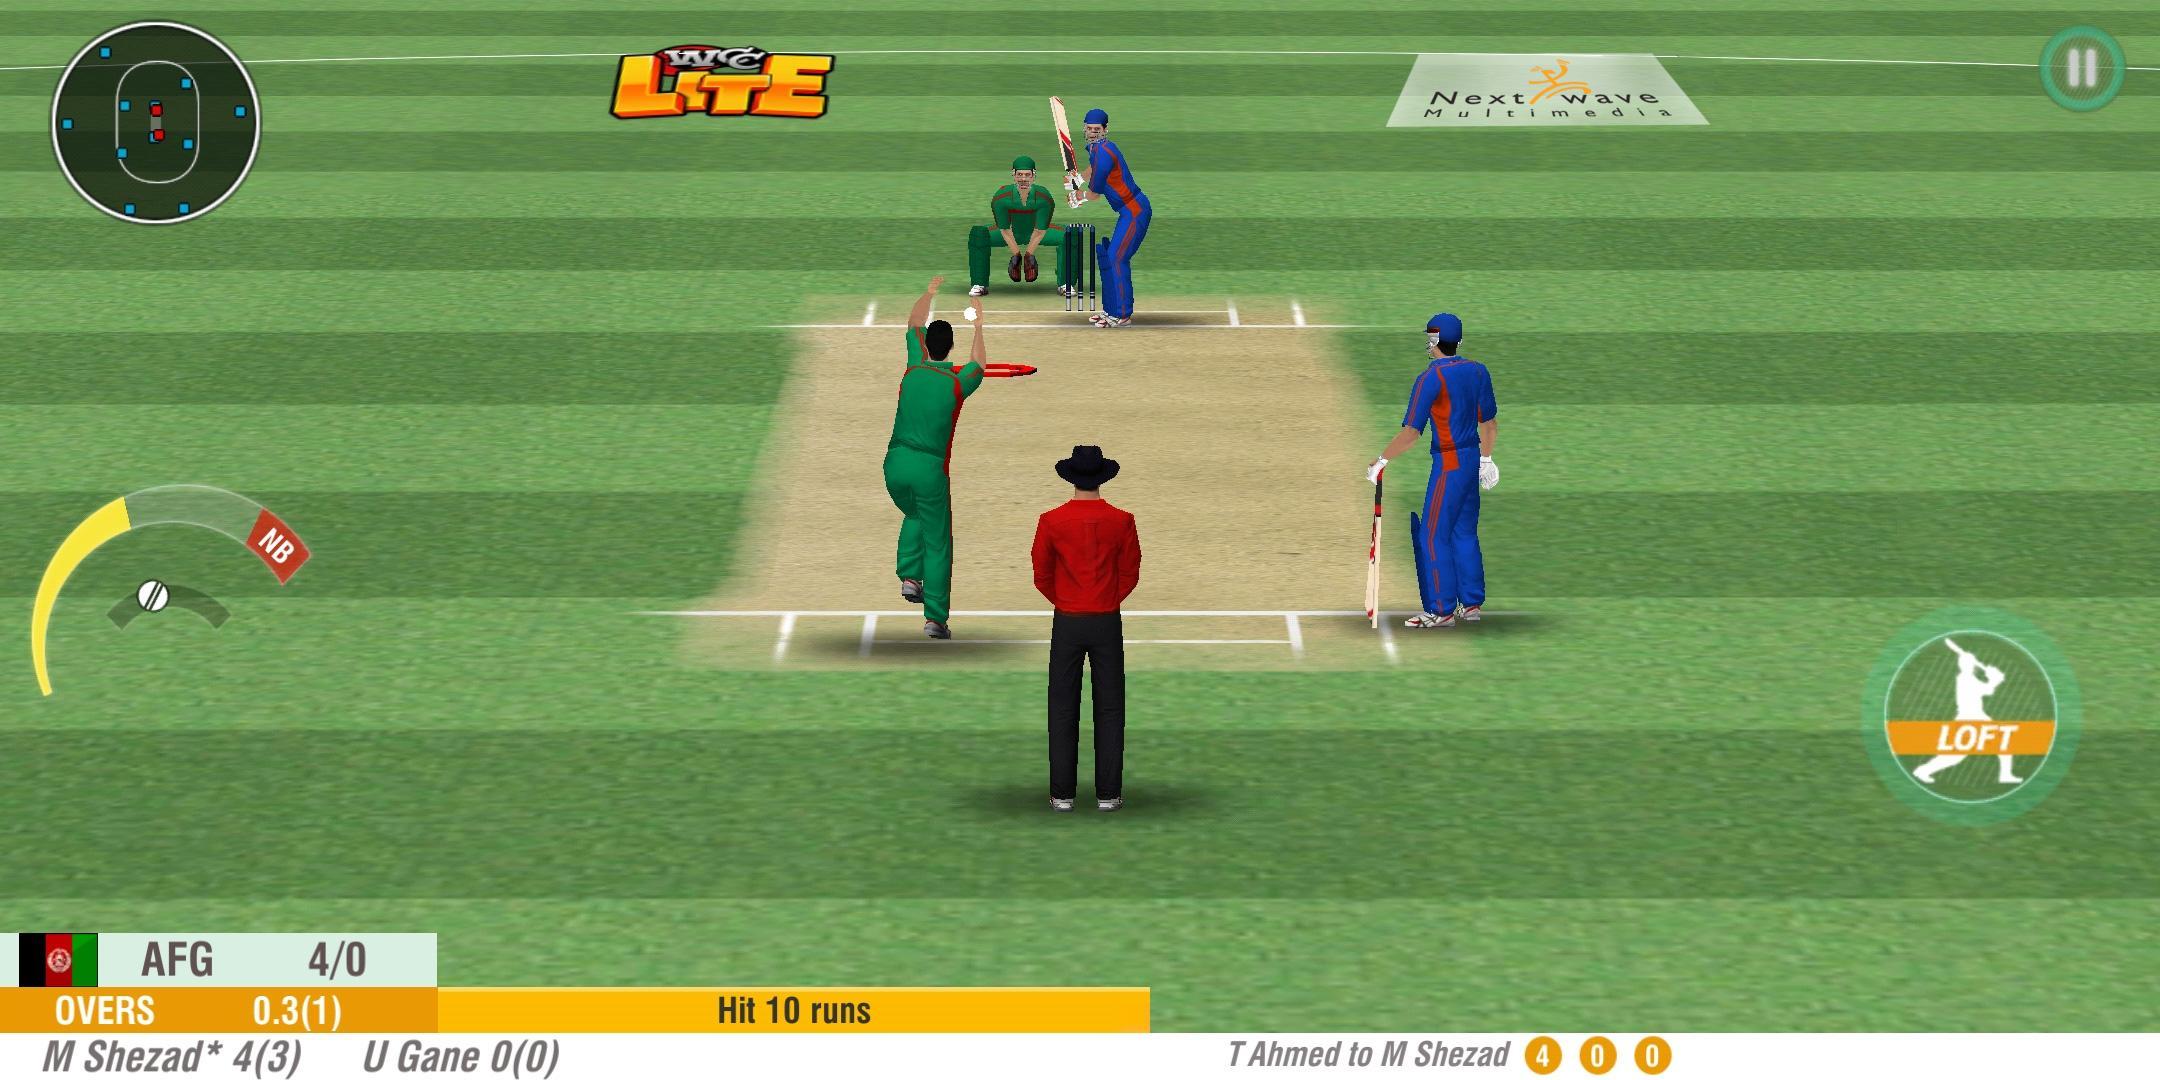 spin bowling view in wcc lite apk